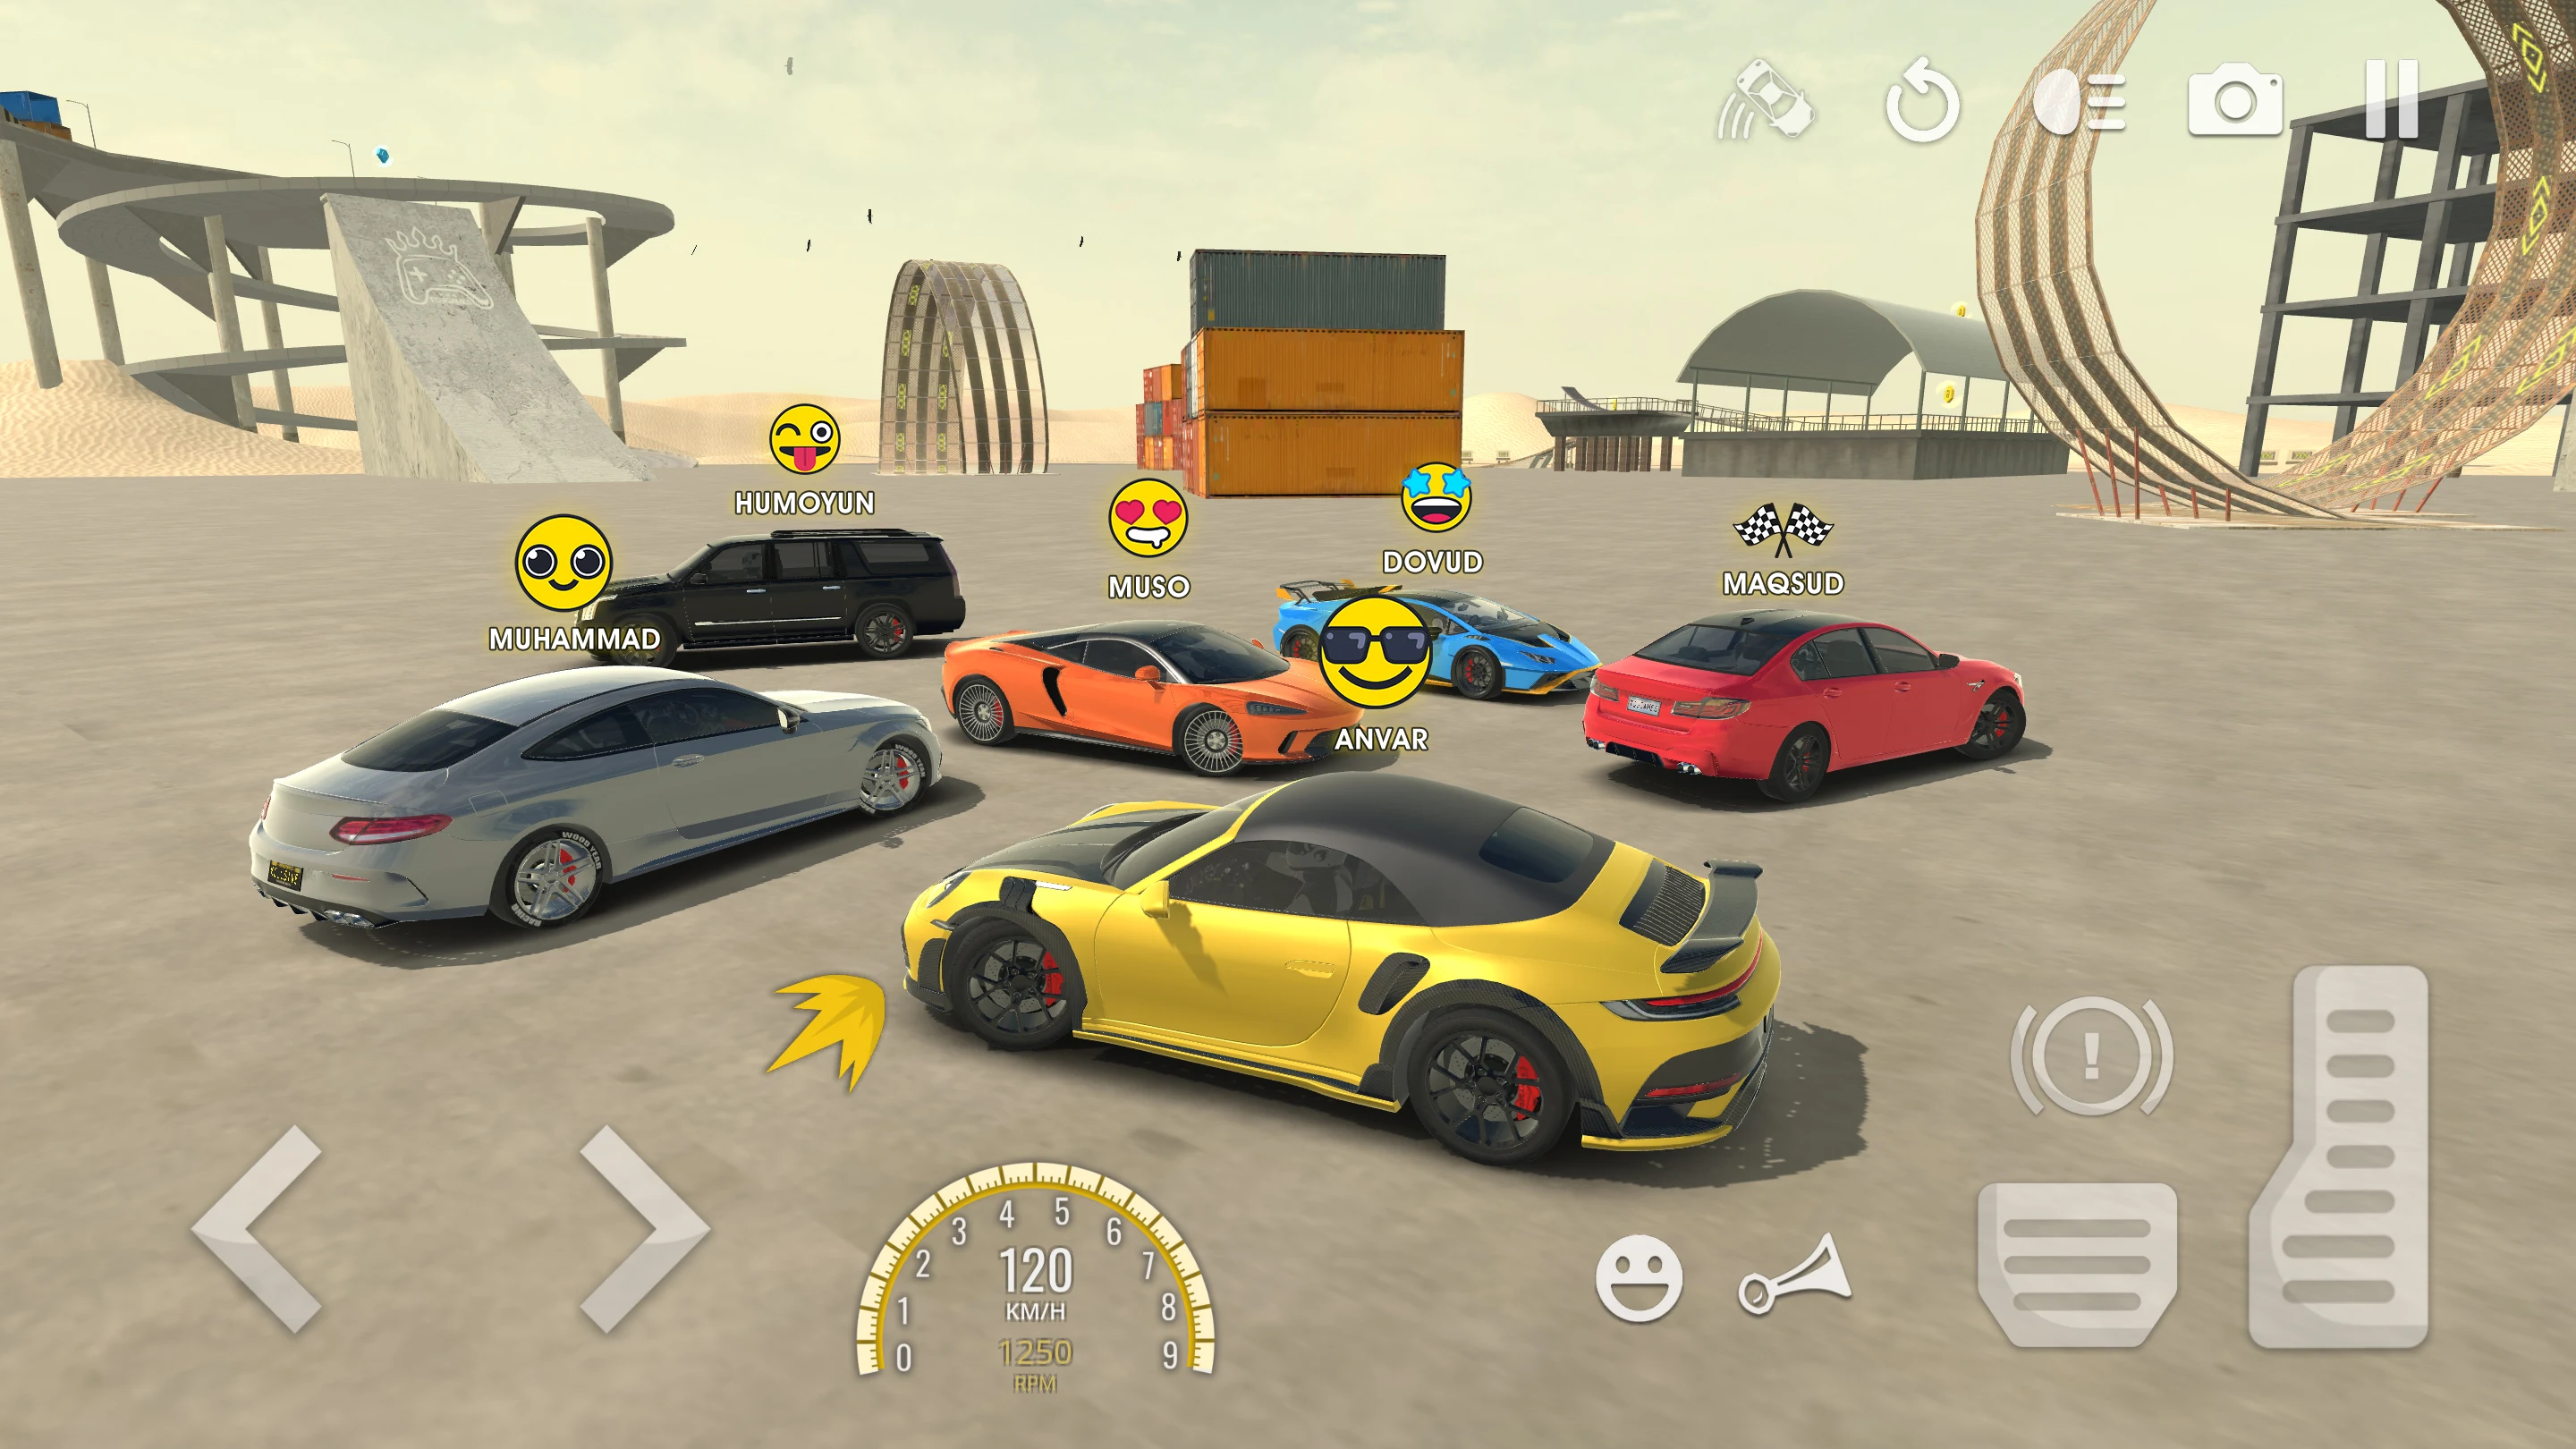 Download 3D Car Racing Game - Car Games on PC with MEmu